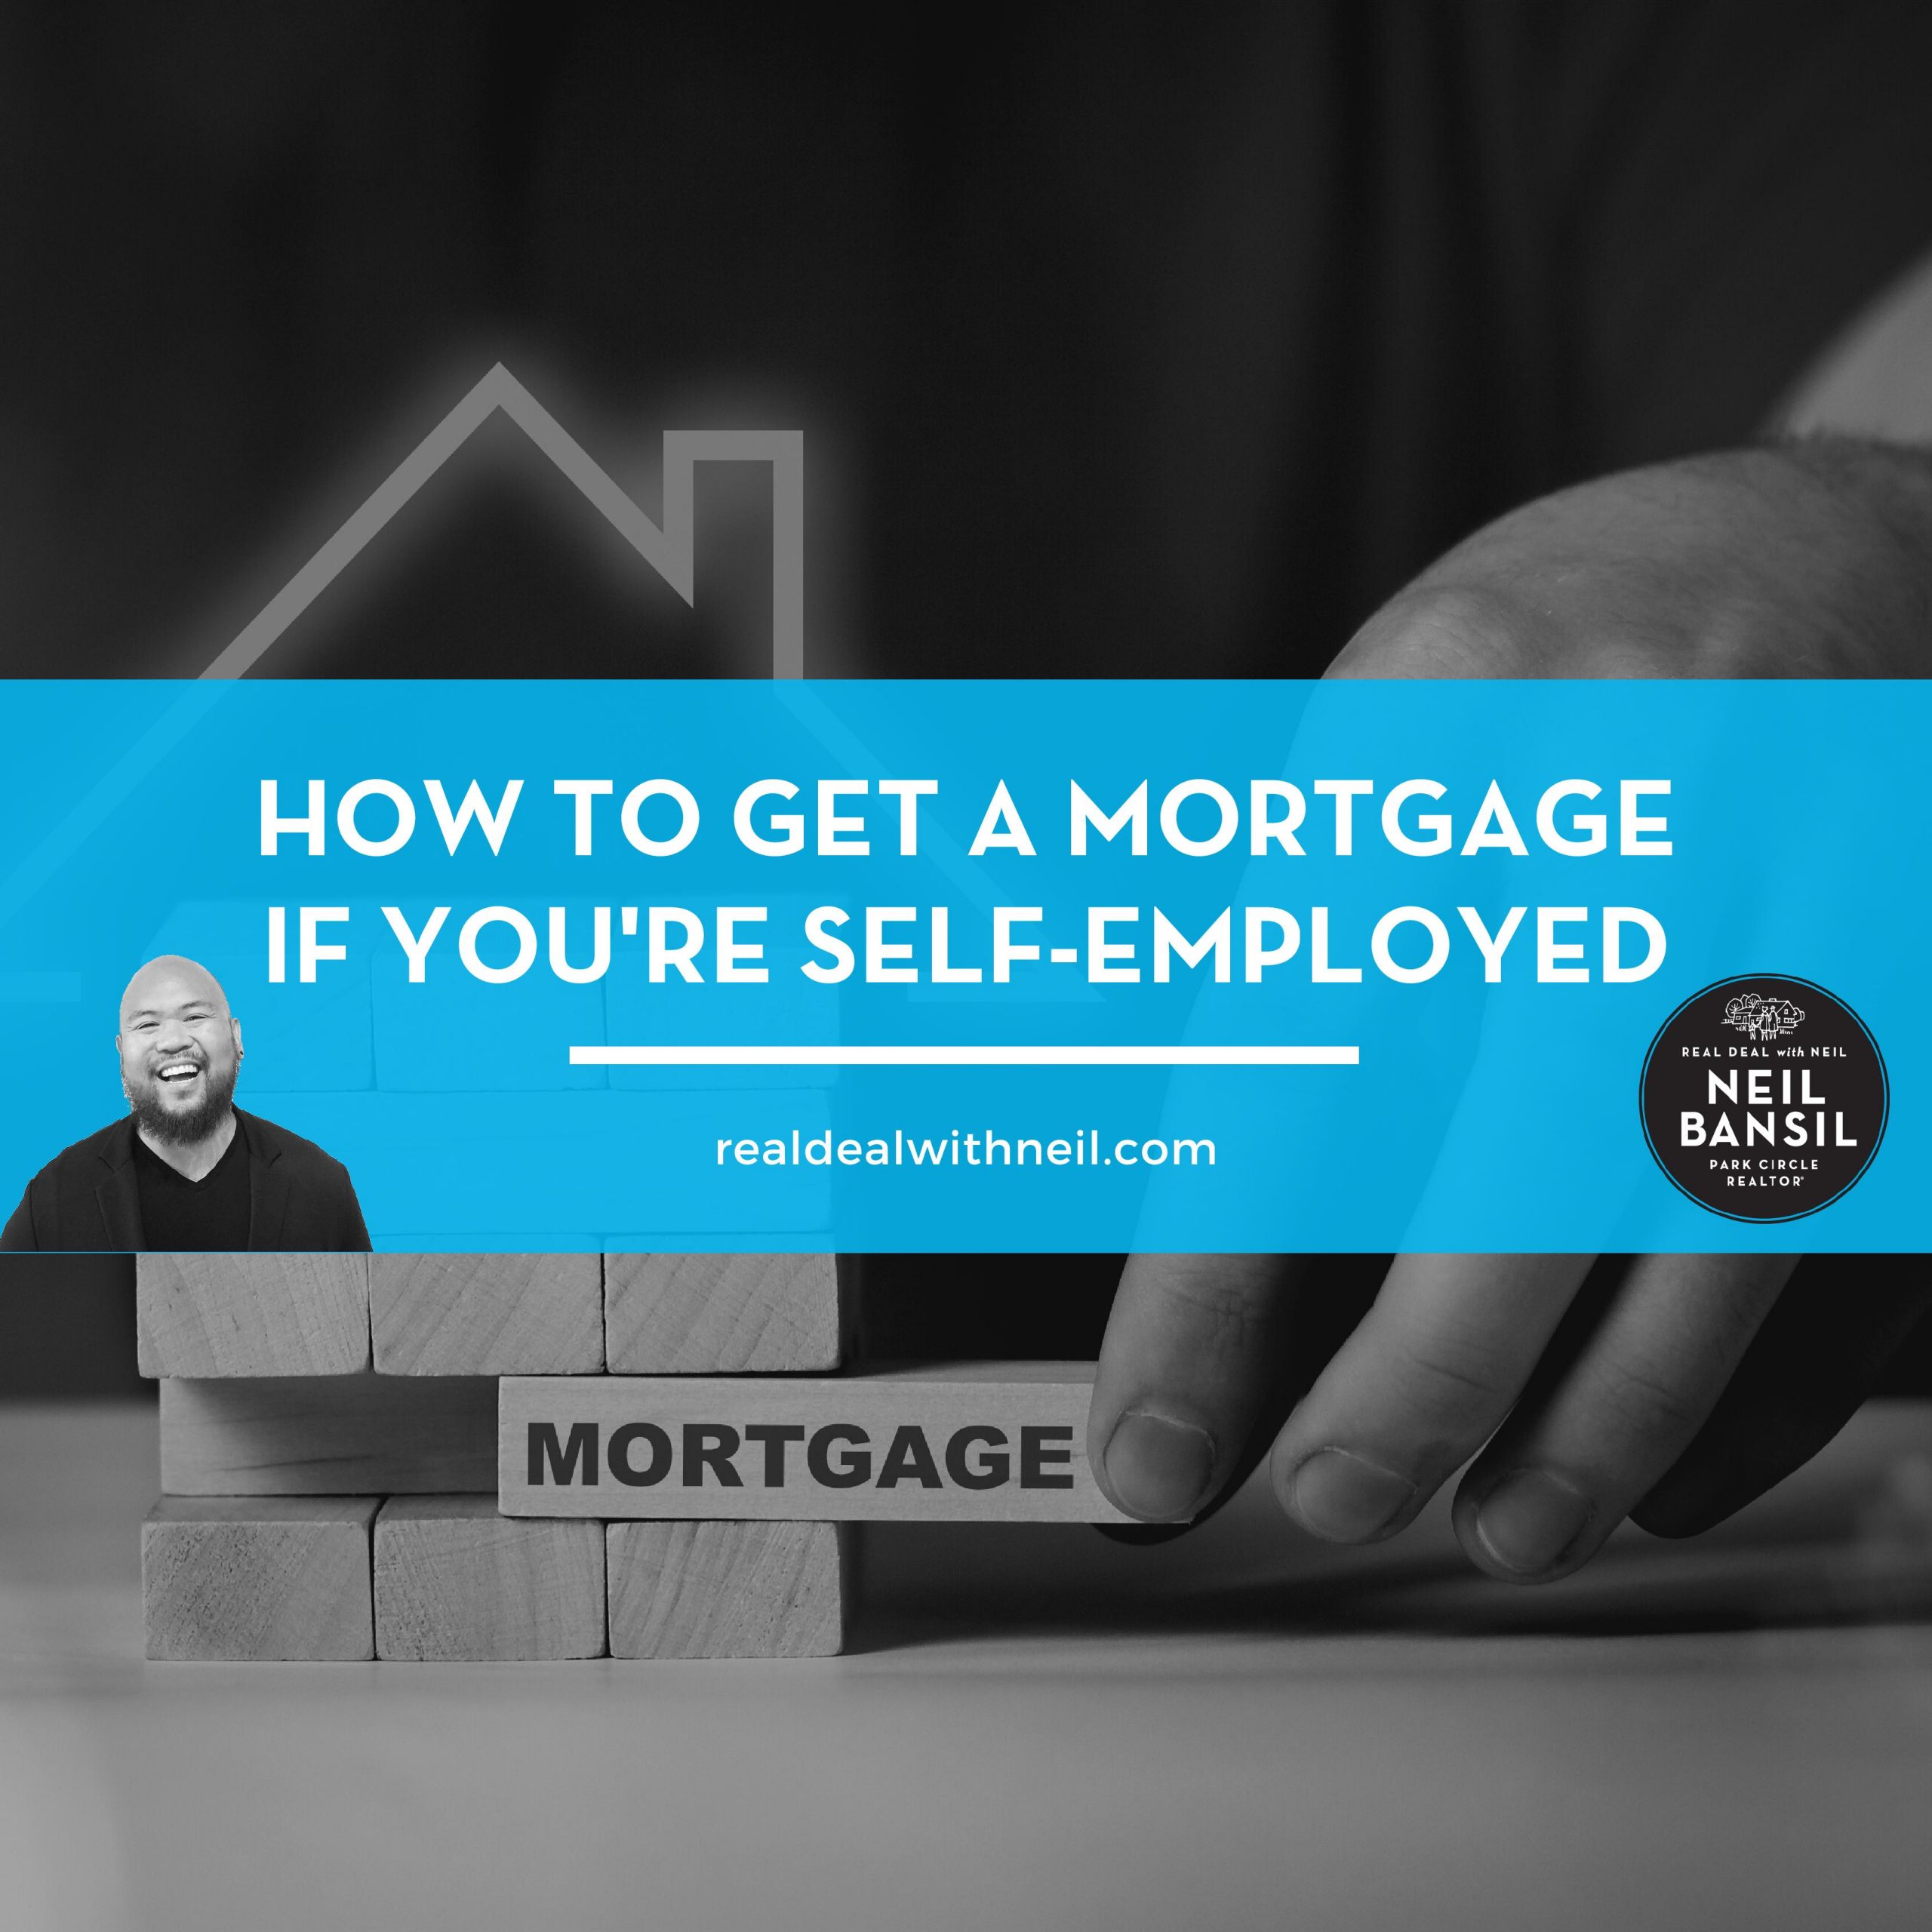 How to get a Mortgage if You're Self-Employed